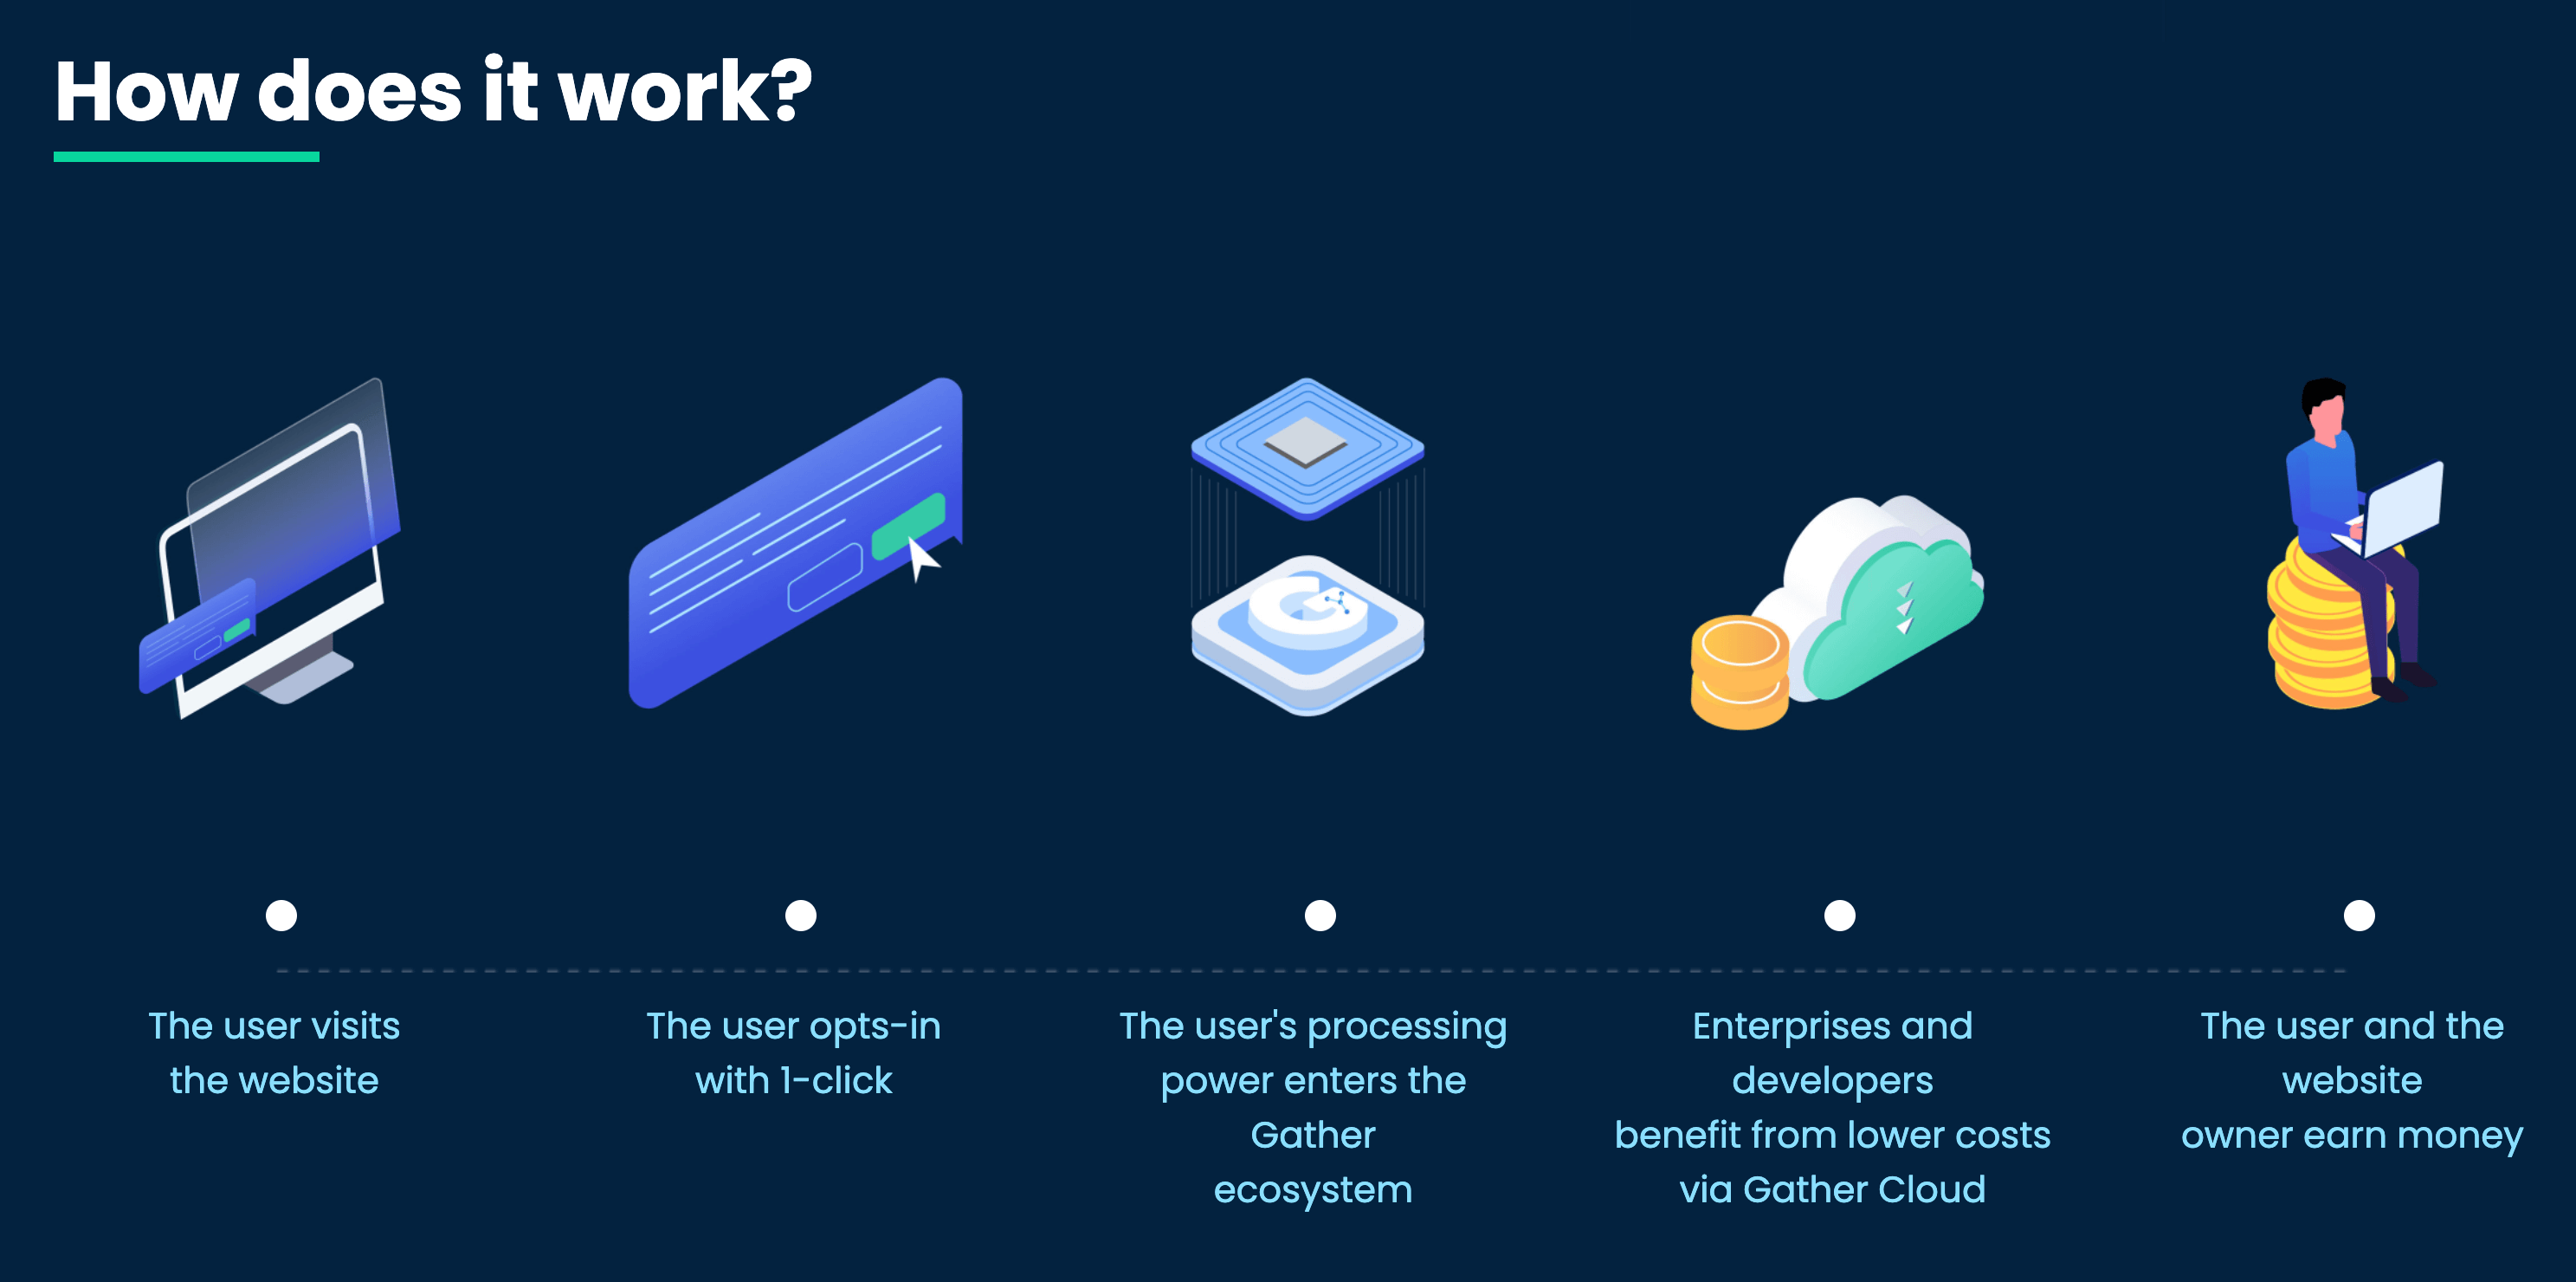 image of Gather Network technology "How Does It Work?" page